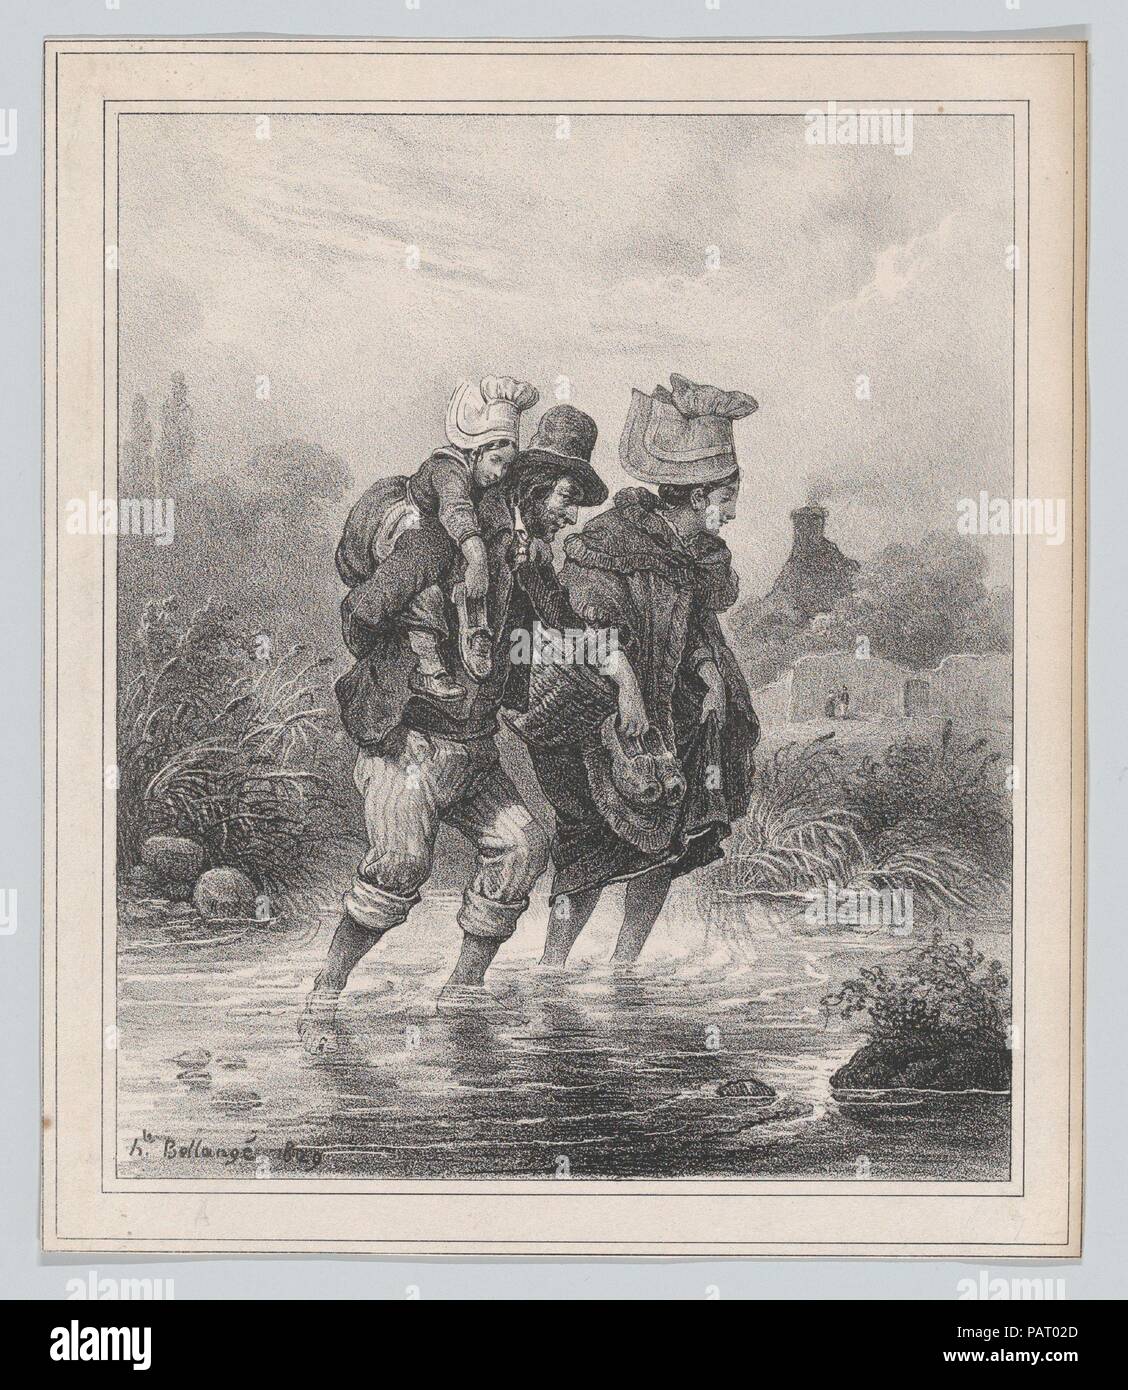 Man, Woman and Child Crossing a Stream. Artist: Hippolyte Bellangé (French, 1800-1866). Dimensions: Sheet: 7 3/8 × 6 5/16 in. (18.7 × 16 cm)  Image: 6 1/2 × 5 7/16 in. (16.5 × 13.8 cm). Date: 1829. Museum: Metropolitan Museum of Art, New York, USA. Stock Photo